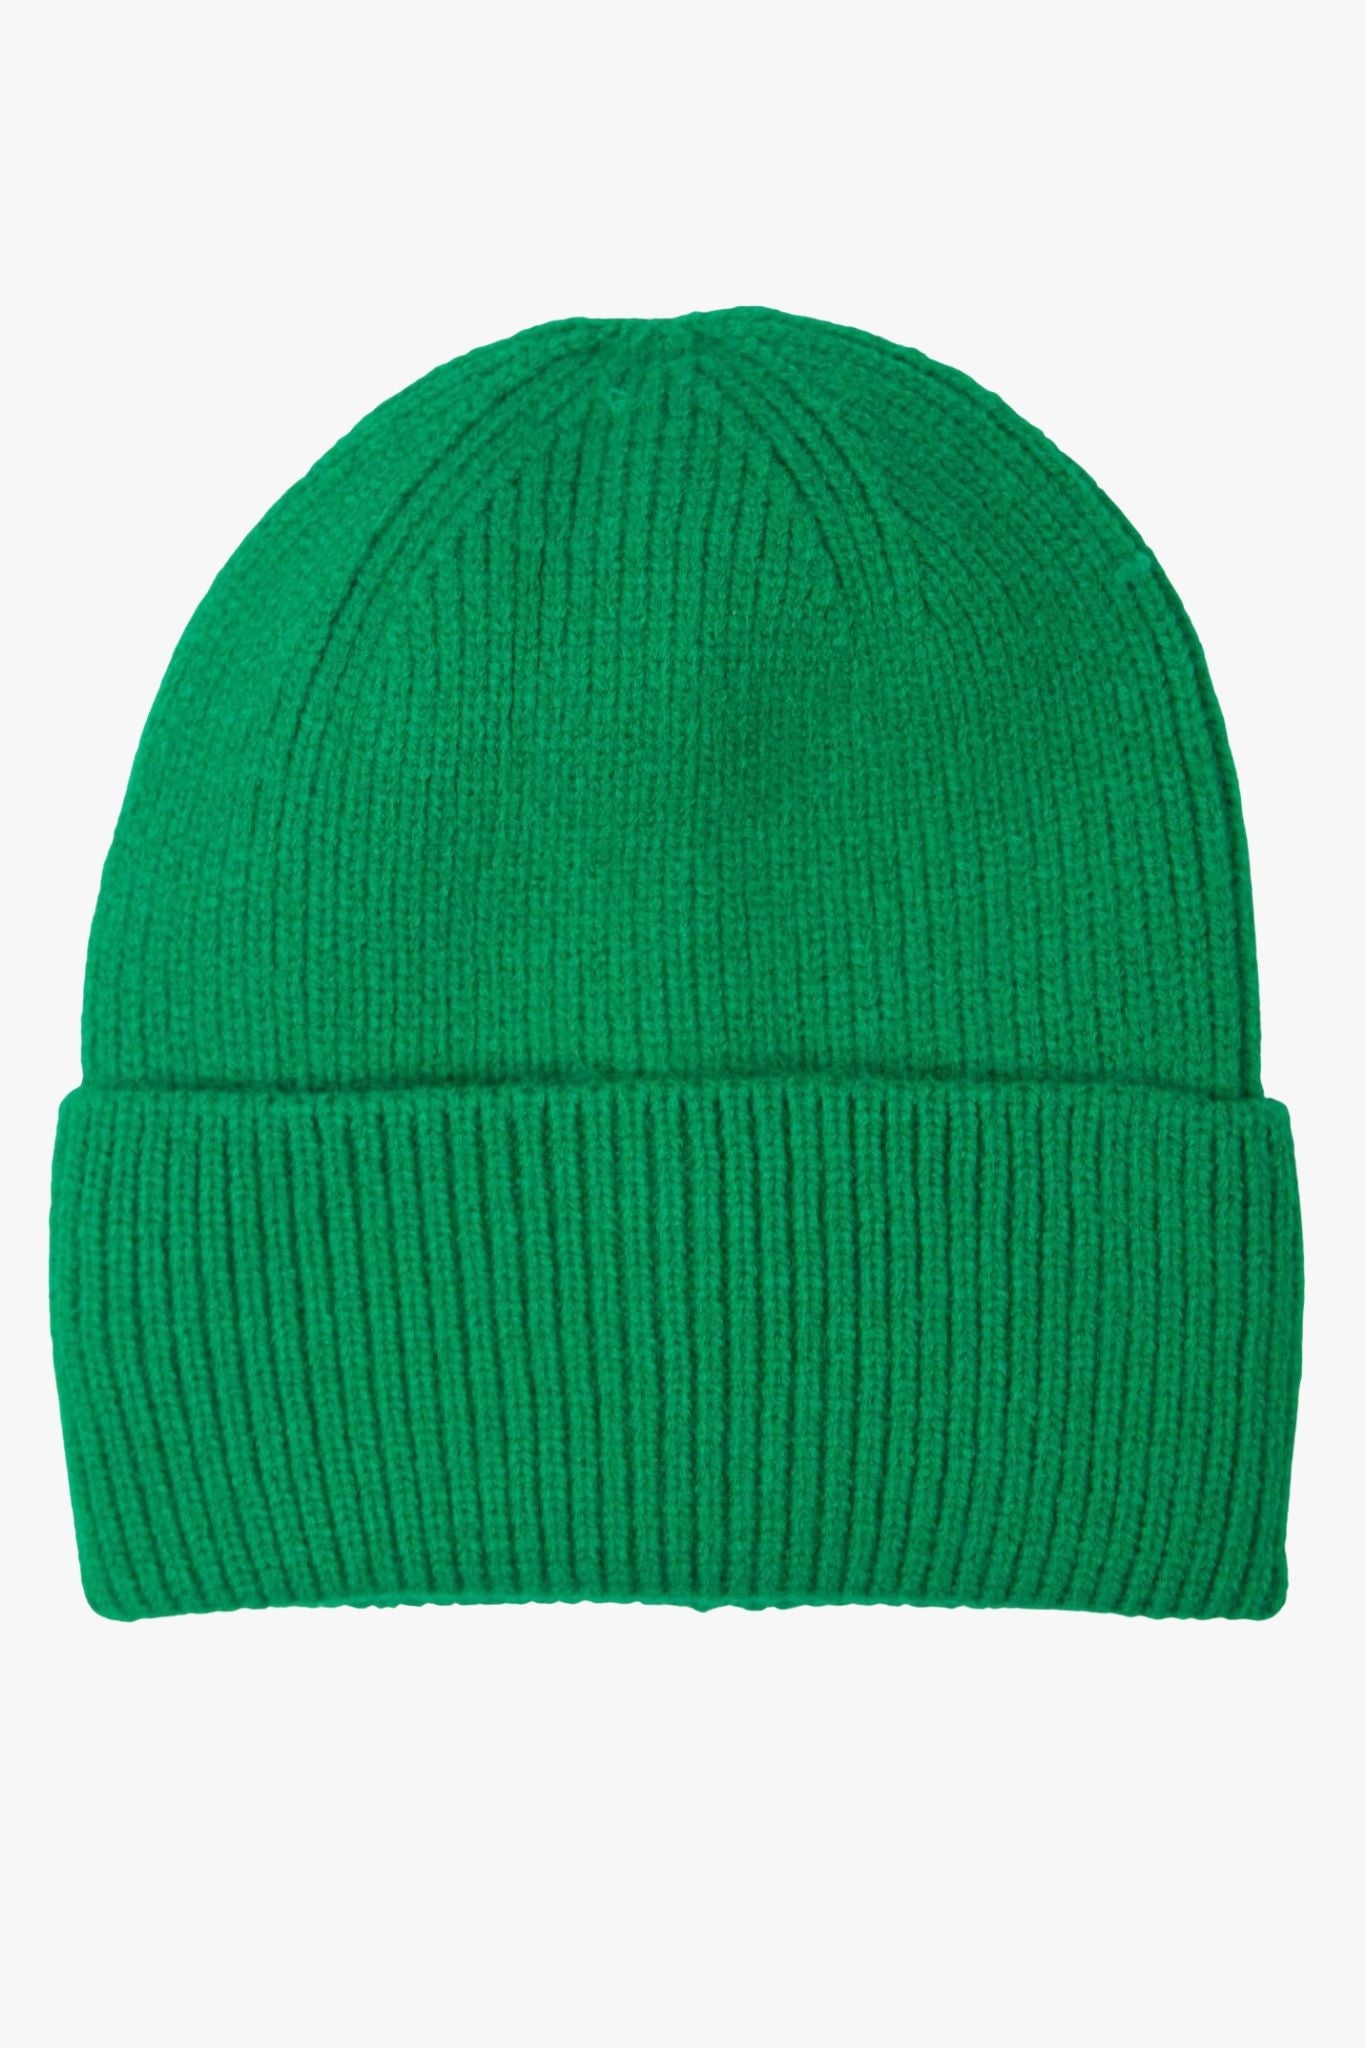 a plain green ribbed knitted beanie hat